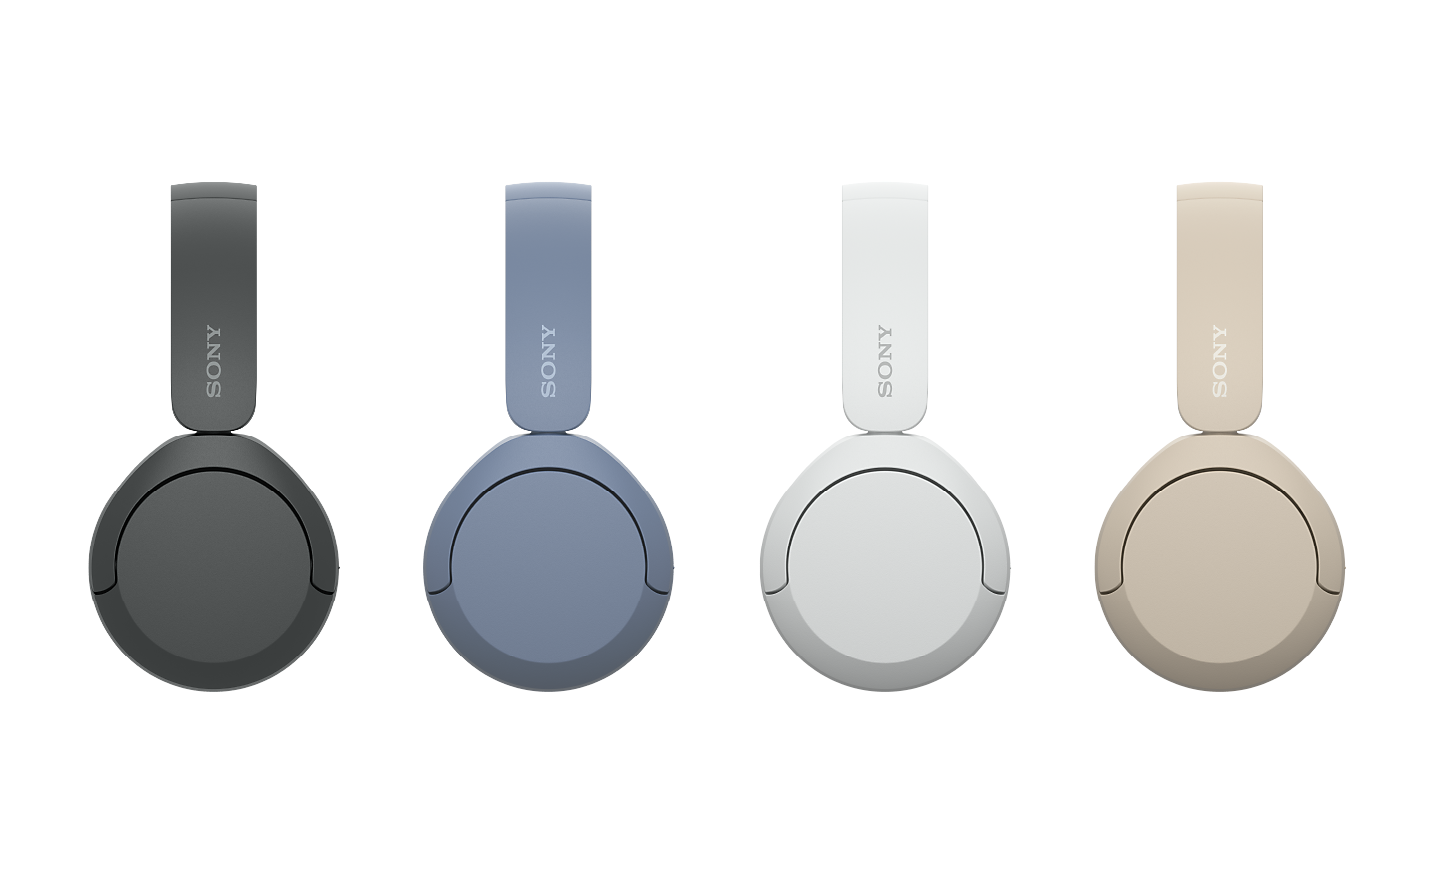 Image of 4 pairs of Sony WH-CH520 headphones in black, blue, white and beige